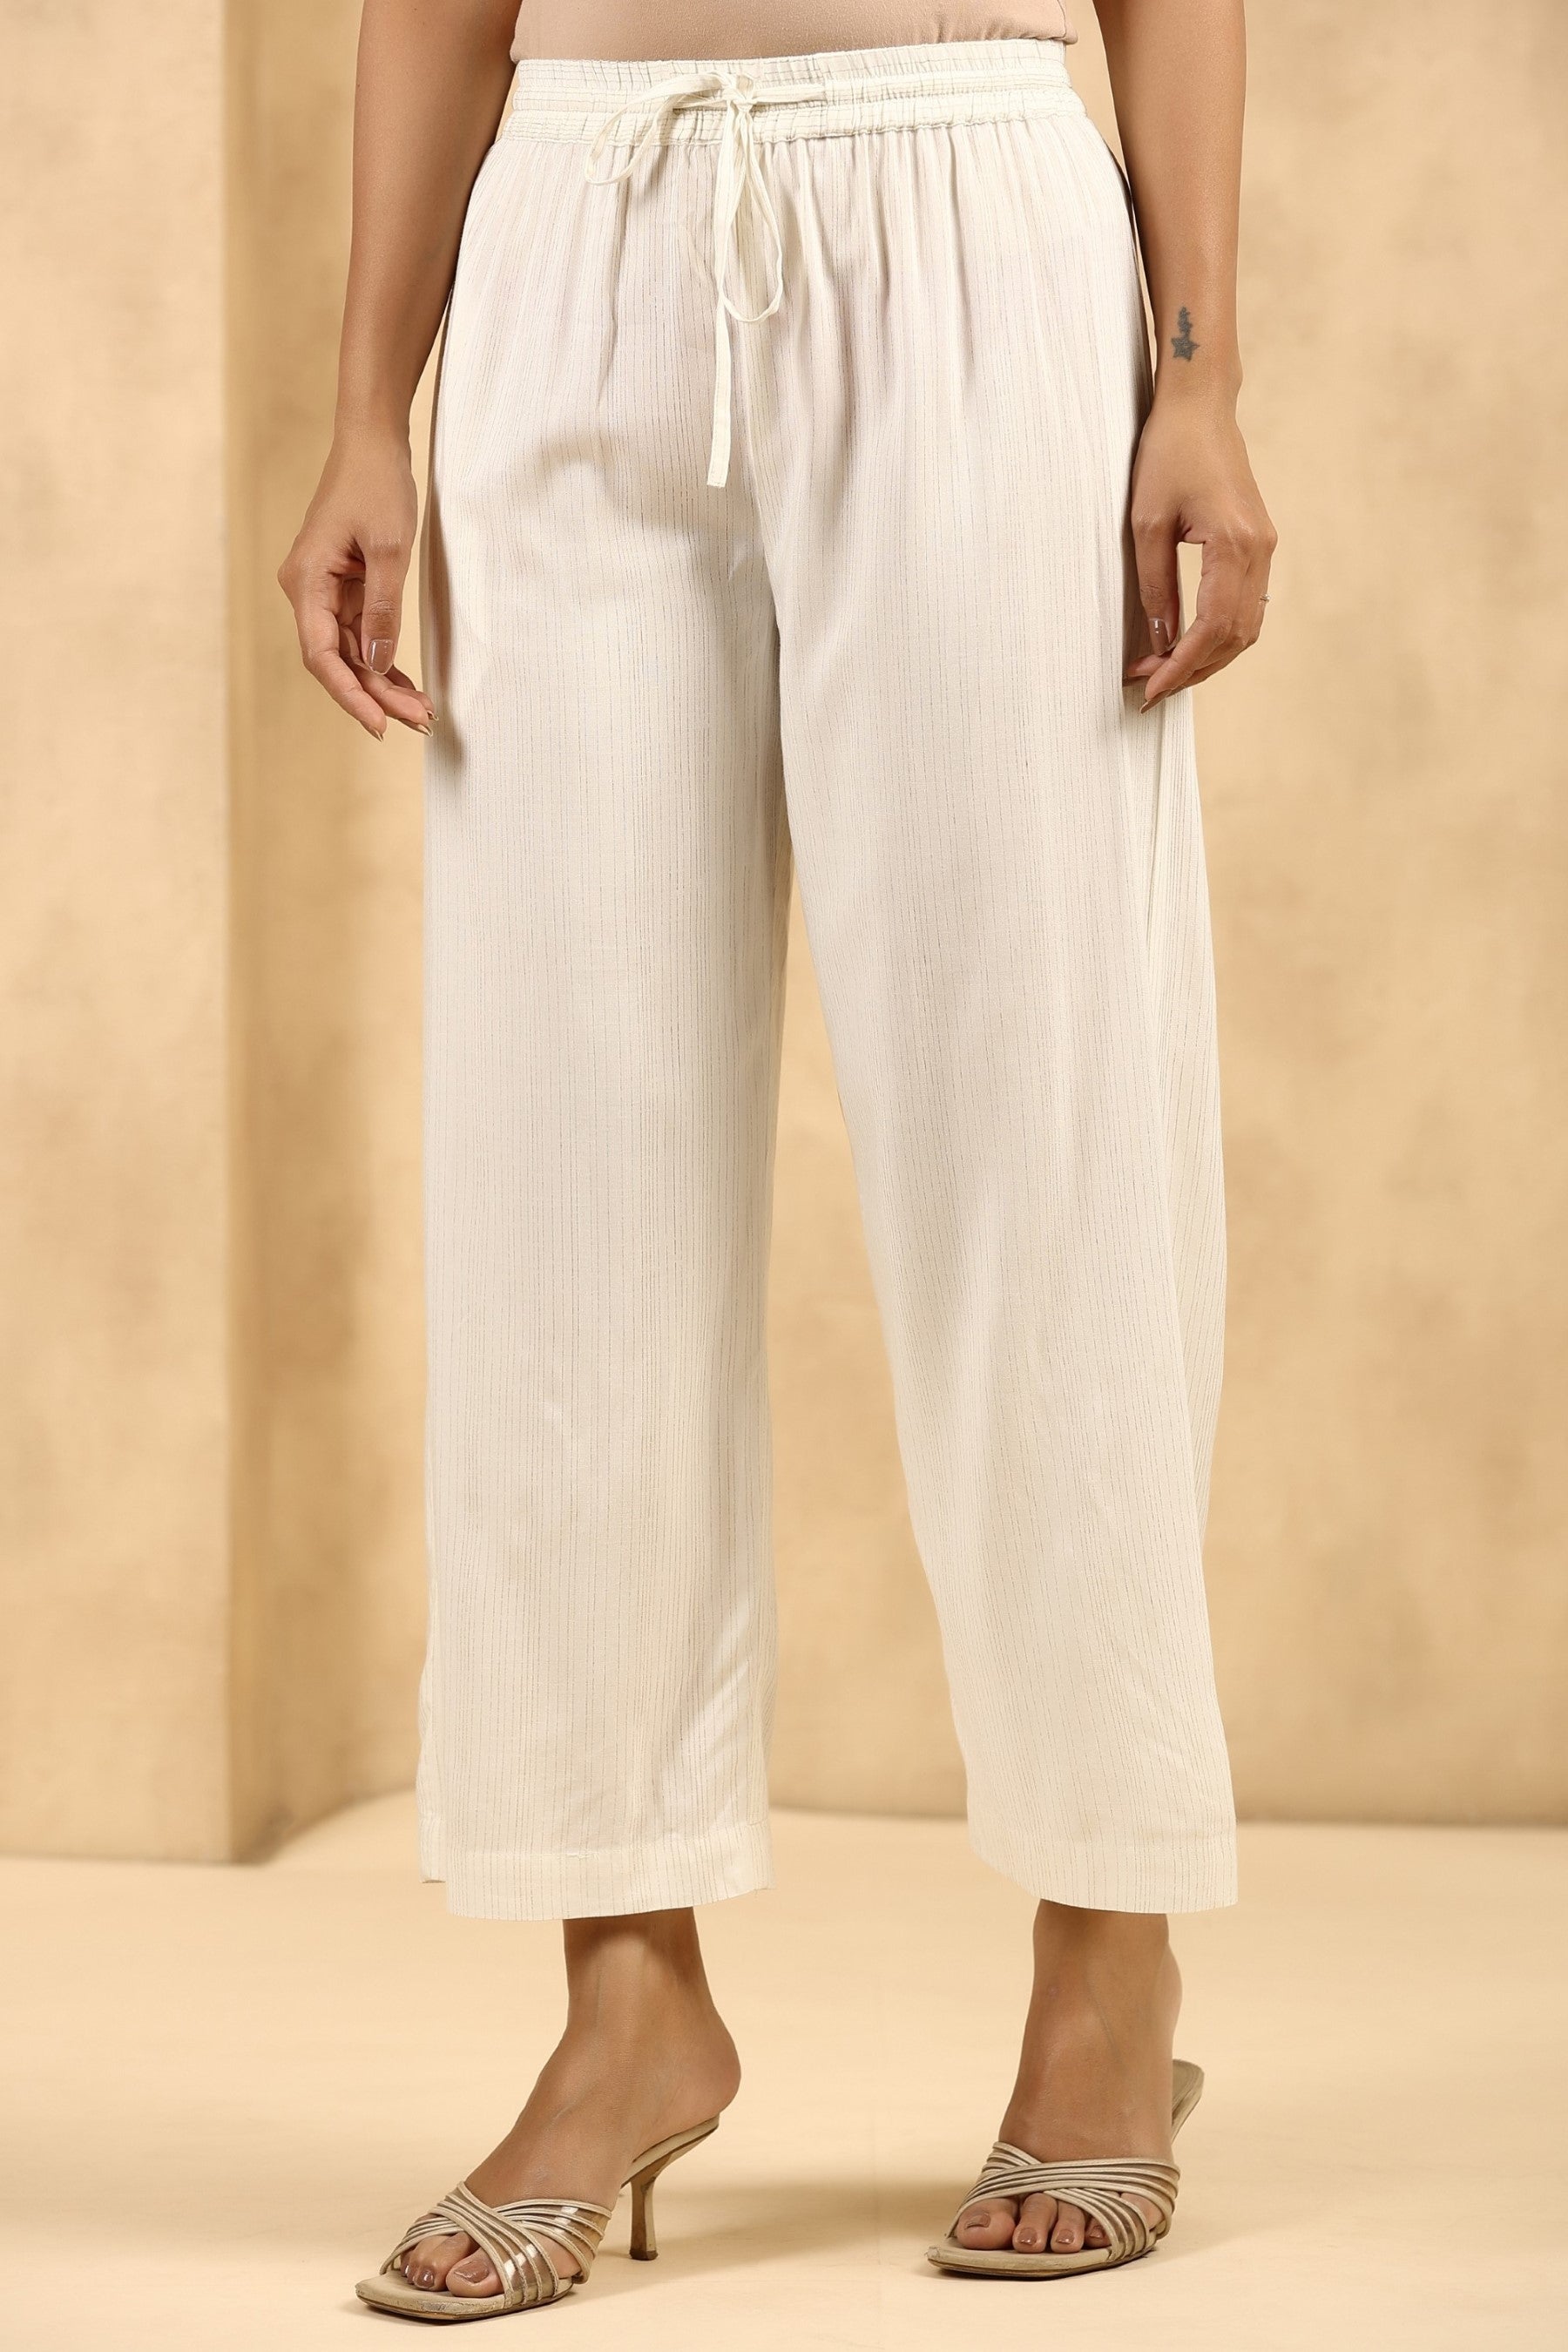 Off-White Rayon Solid Wide Leg Palazzo